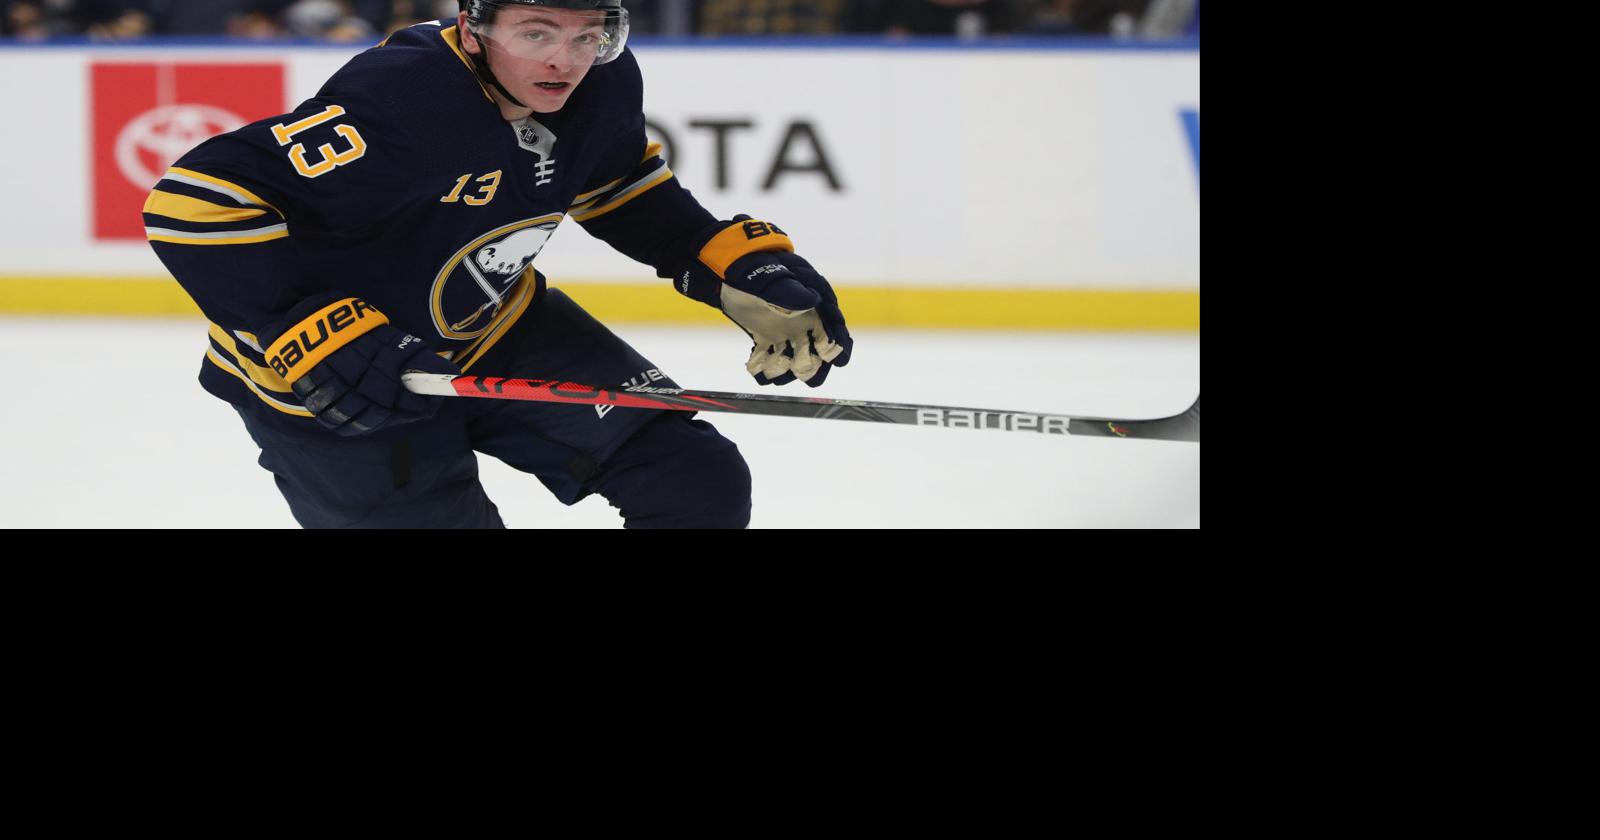 Jimmy Vesey remains focused on helping Sabres as trade deadline approaches